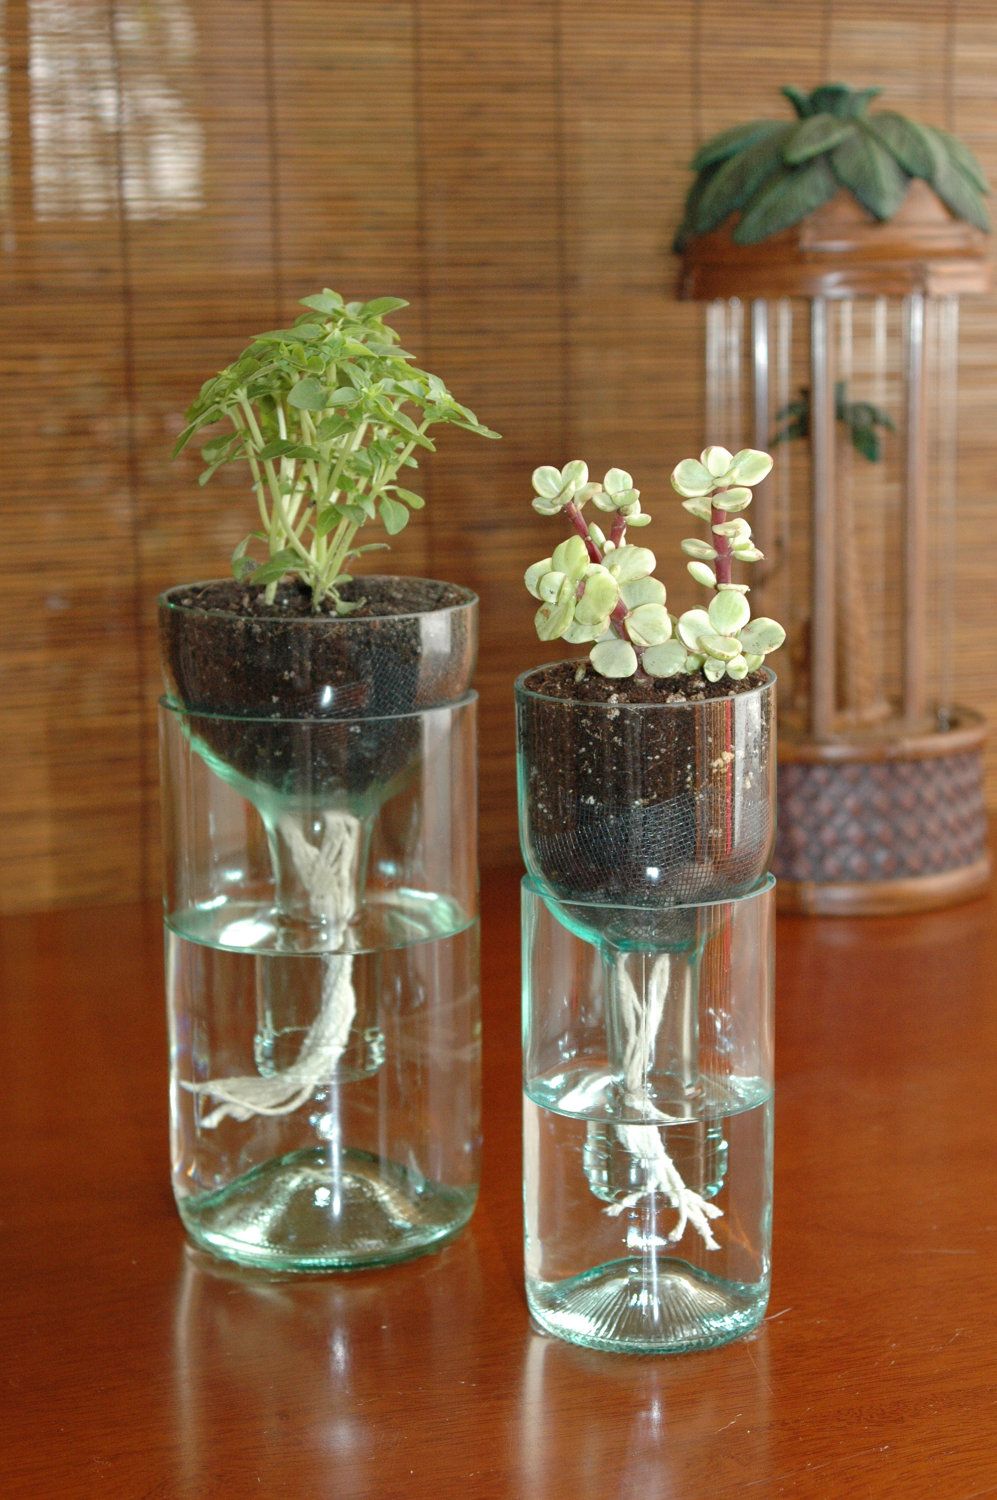 Self-watering planter made from recycled  bottles…clever clever.